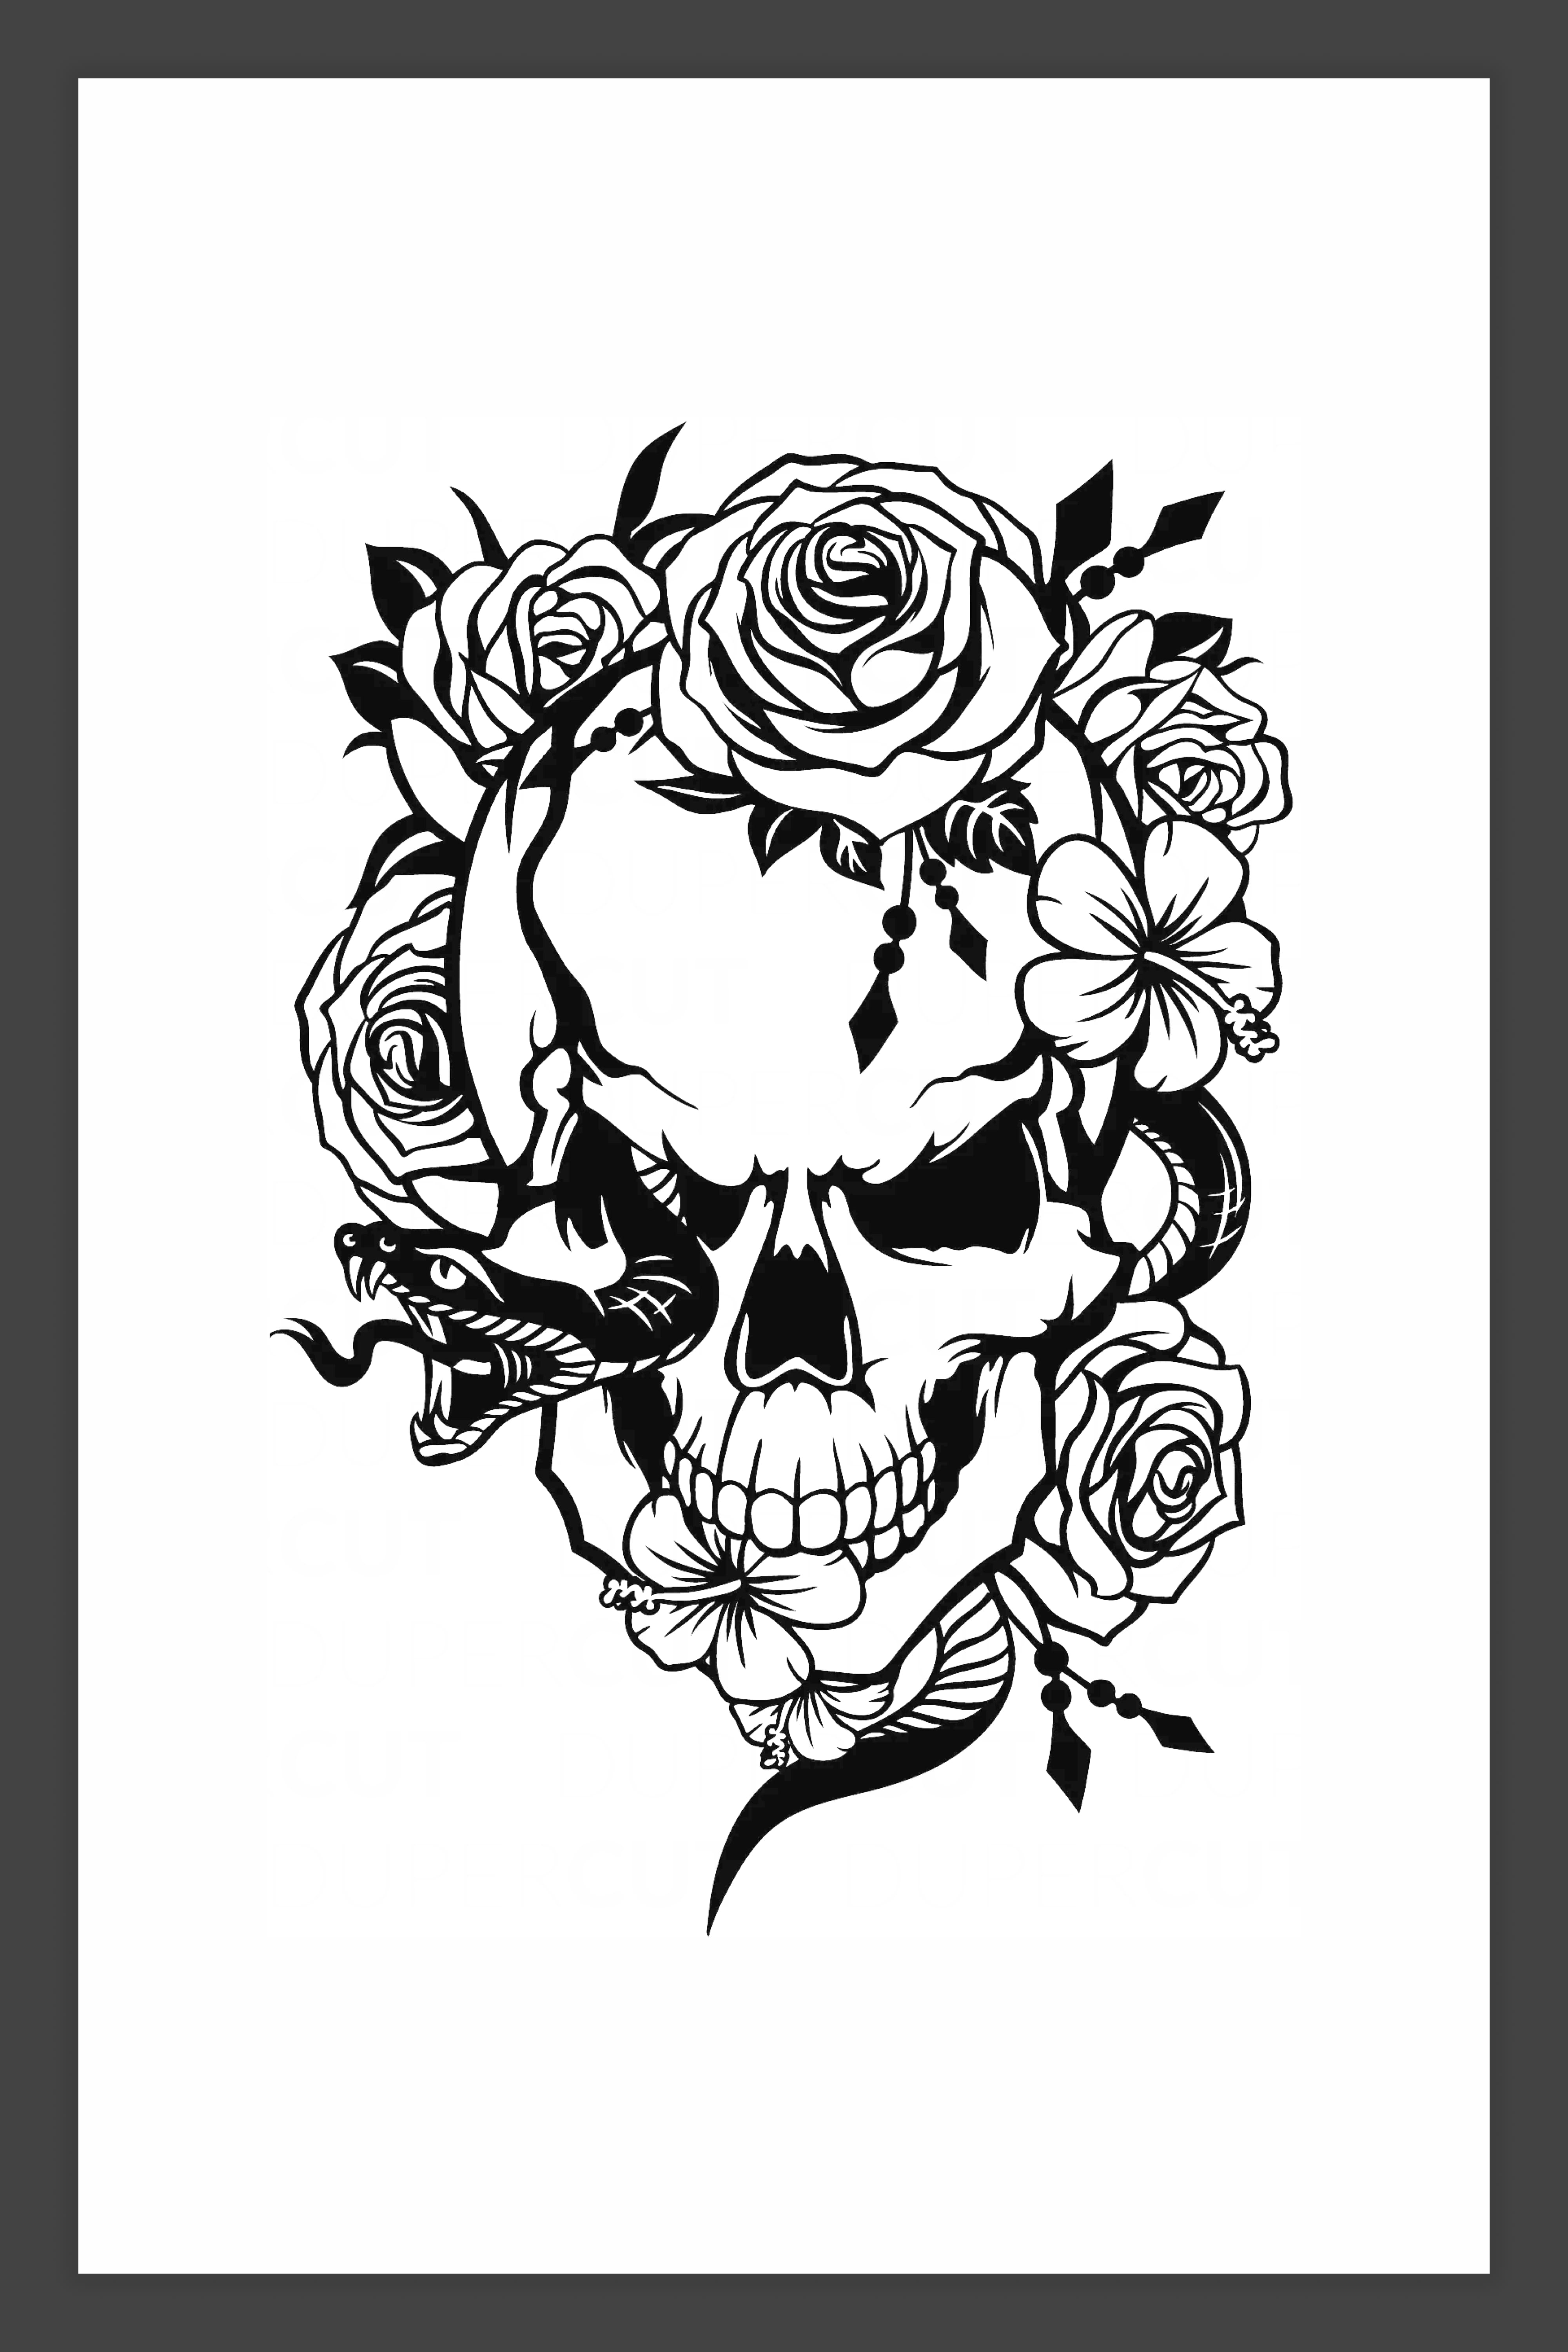 Image of a skull with roses and a snake in the eye socket.